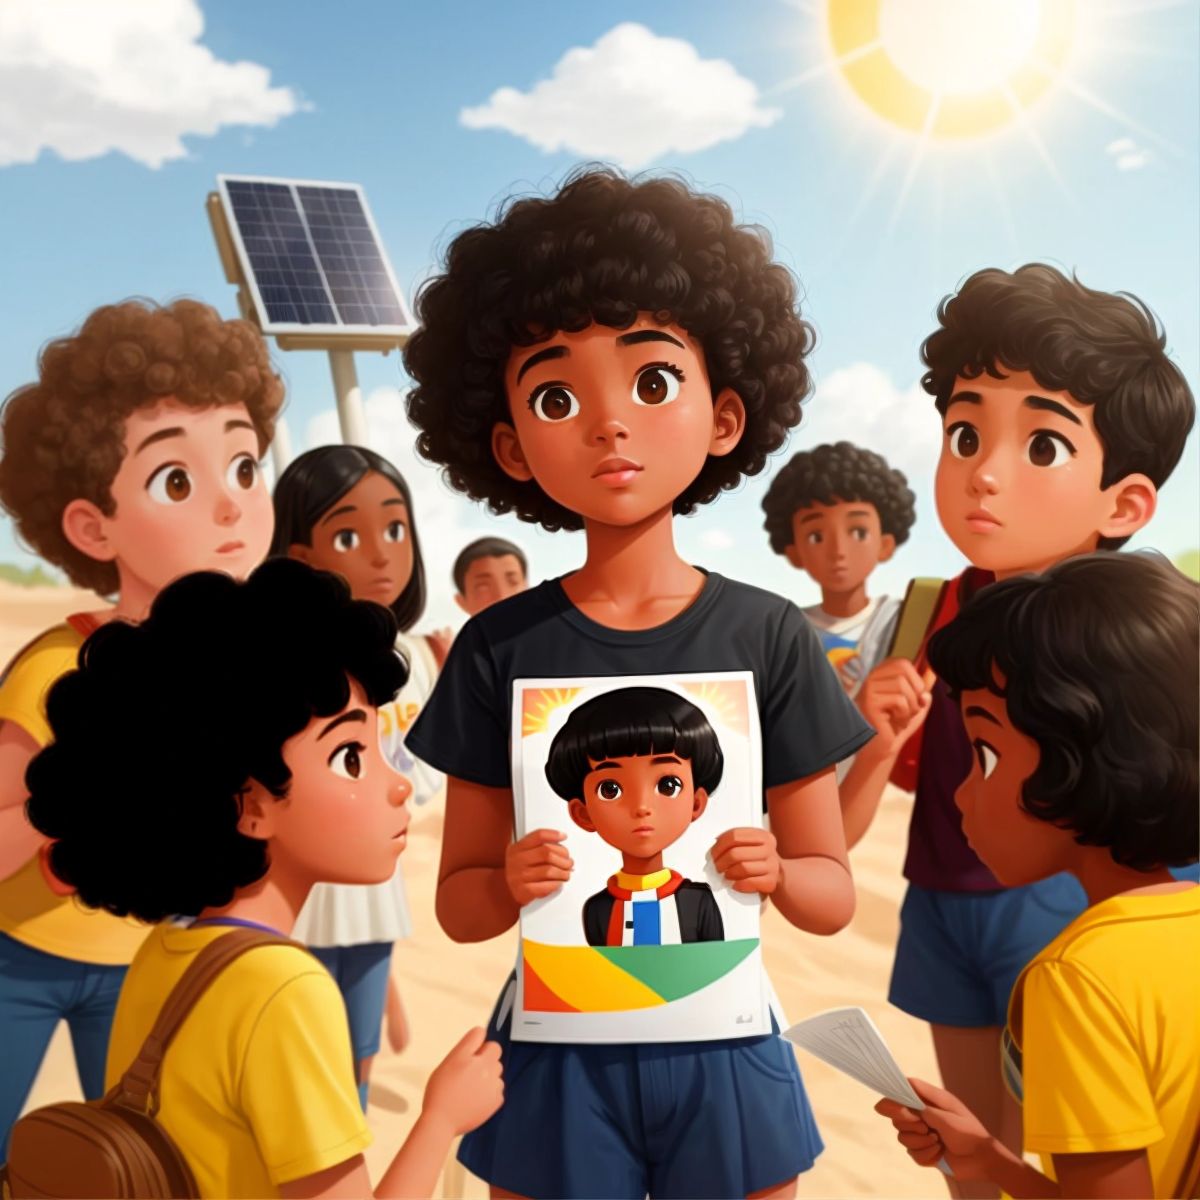 Kid 2 Girl speaking to a group of her peers, holding a poster about solar energy